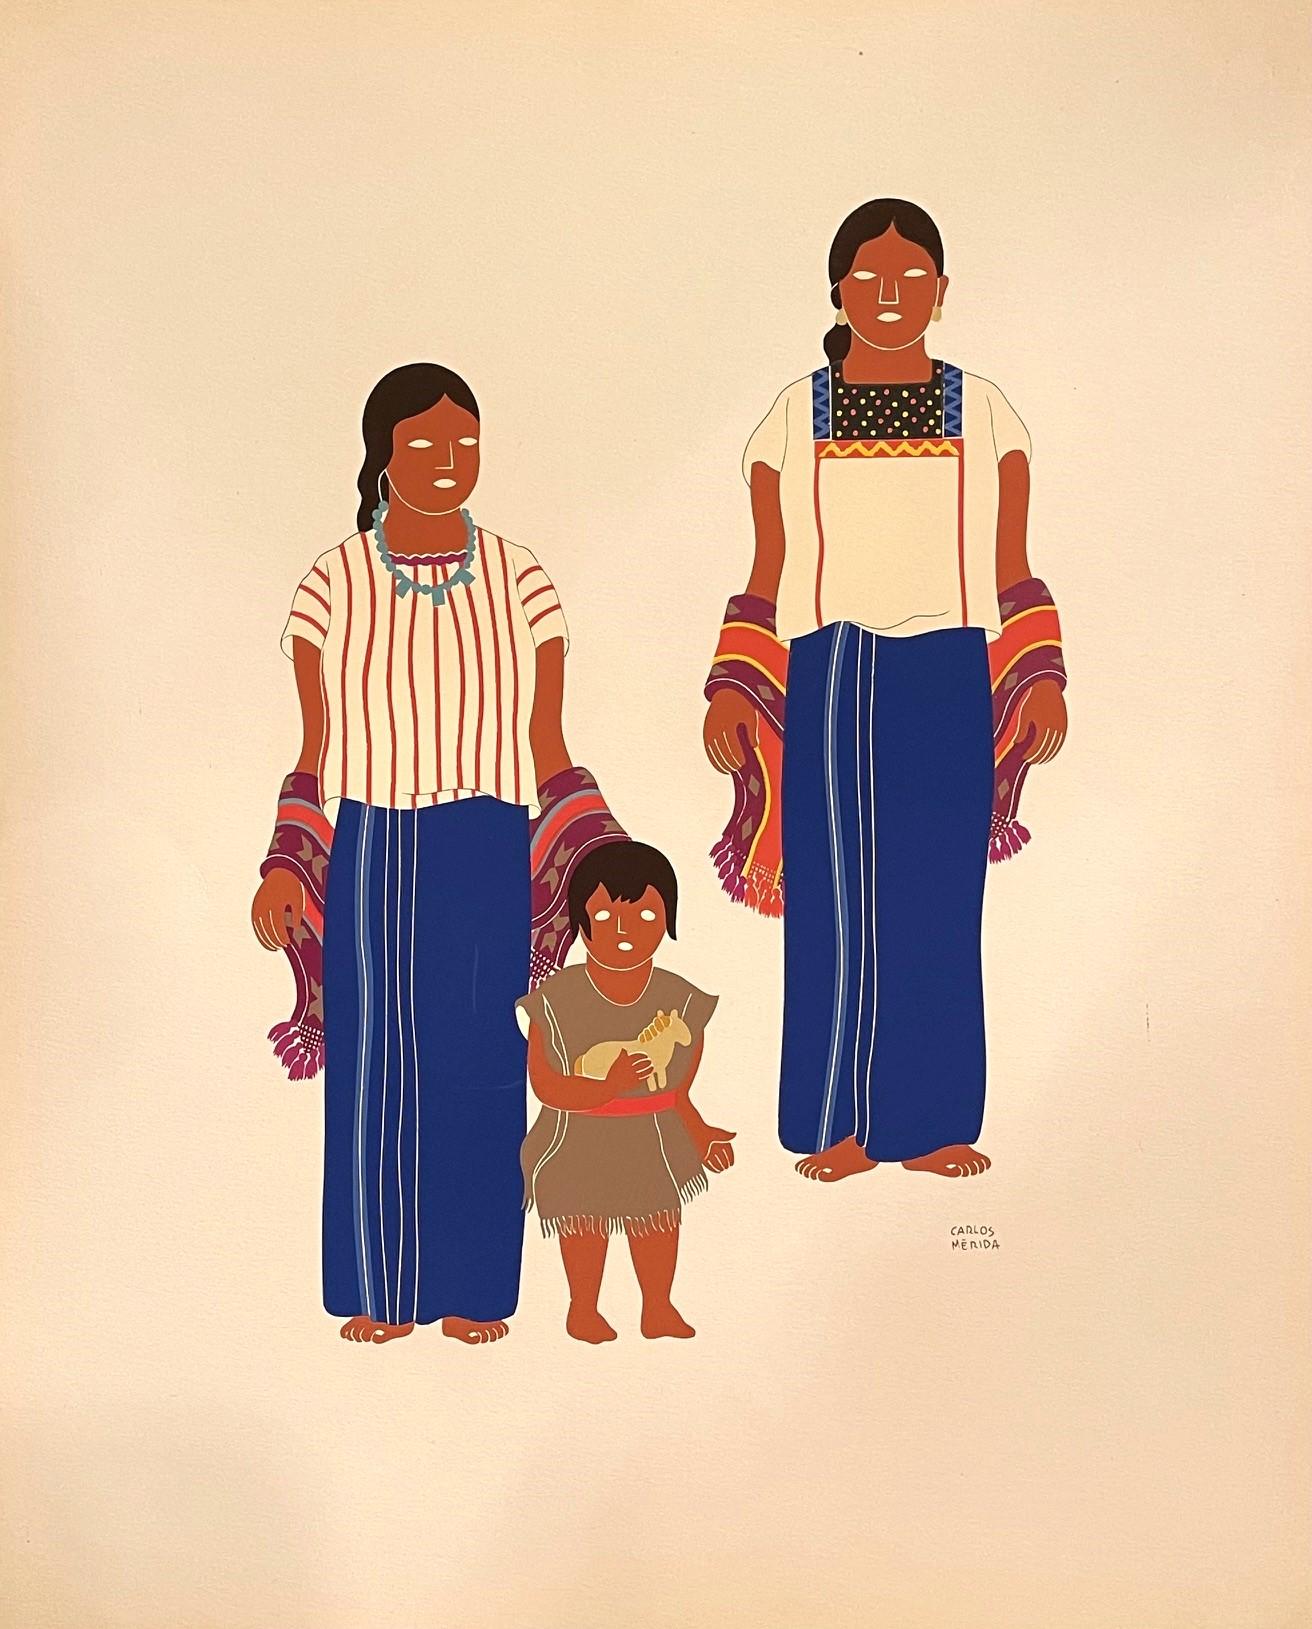 Merida, Carlos (Guatamala/Mexico, 1891-1985). MEXICAN COSTUME. Pocahontas Press, Chicago, 1941. Edition of 1000. Folio (16 1/2 x 13 1/2 inches), portfolio, cloth-backed boards, with text booklet and 25 screenprints after drawings by Merida. The